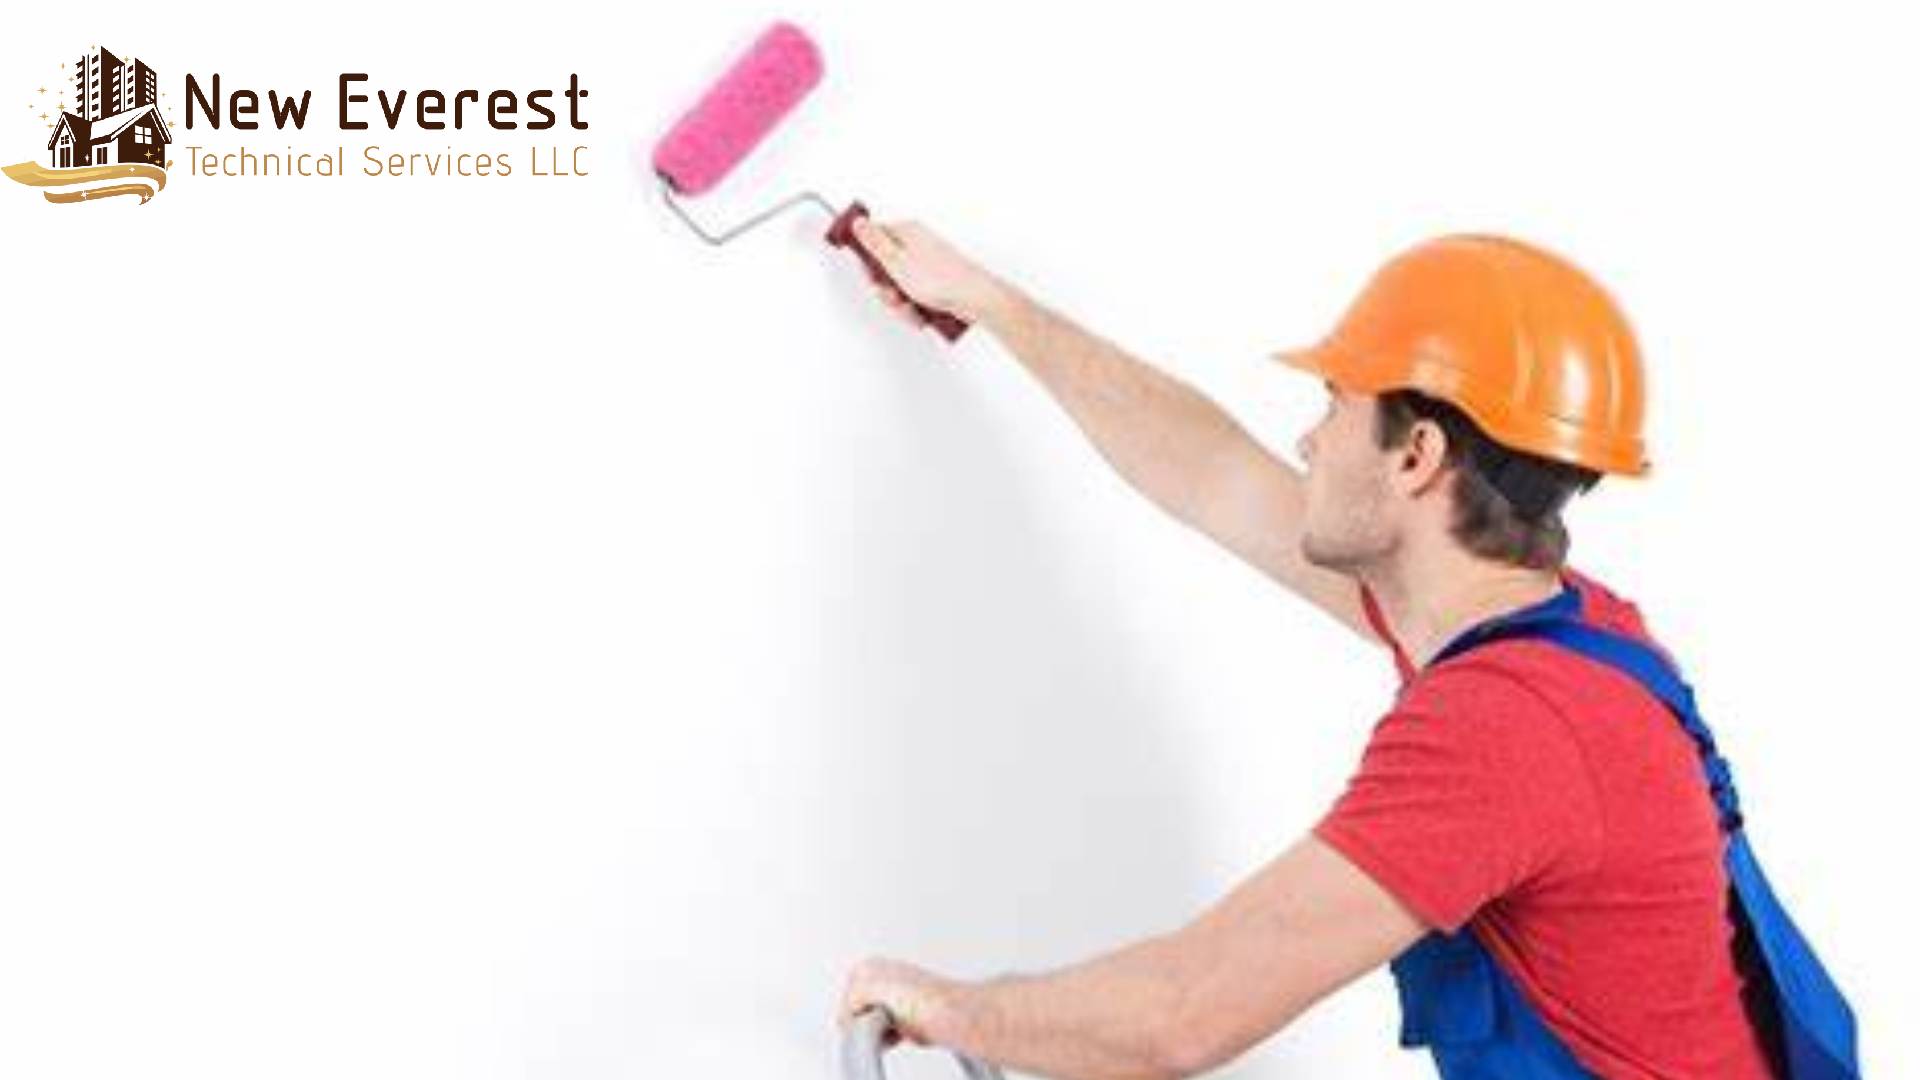 How much does it cost to hire a painter in Dubai?